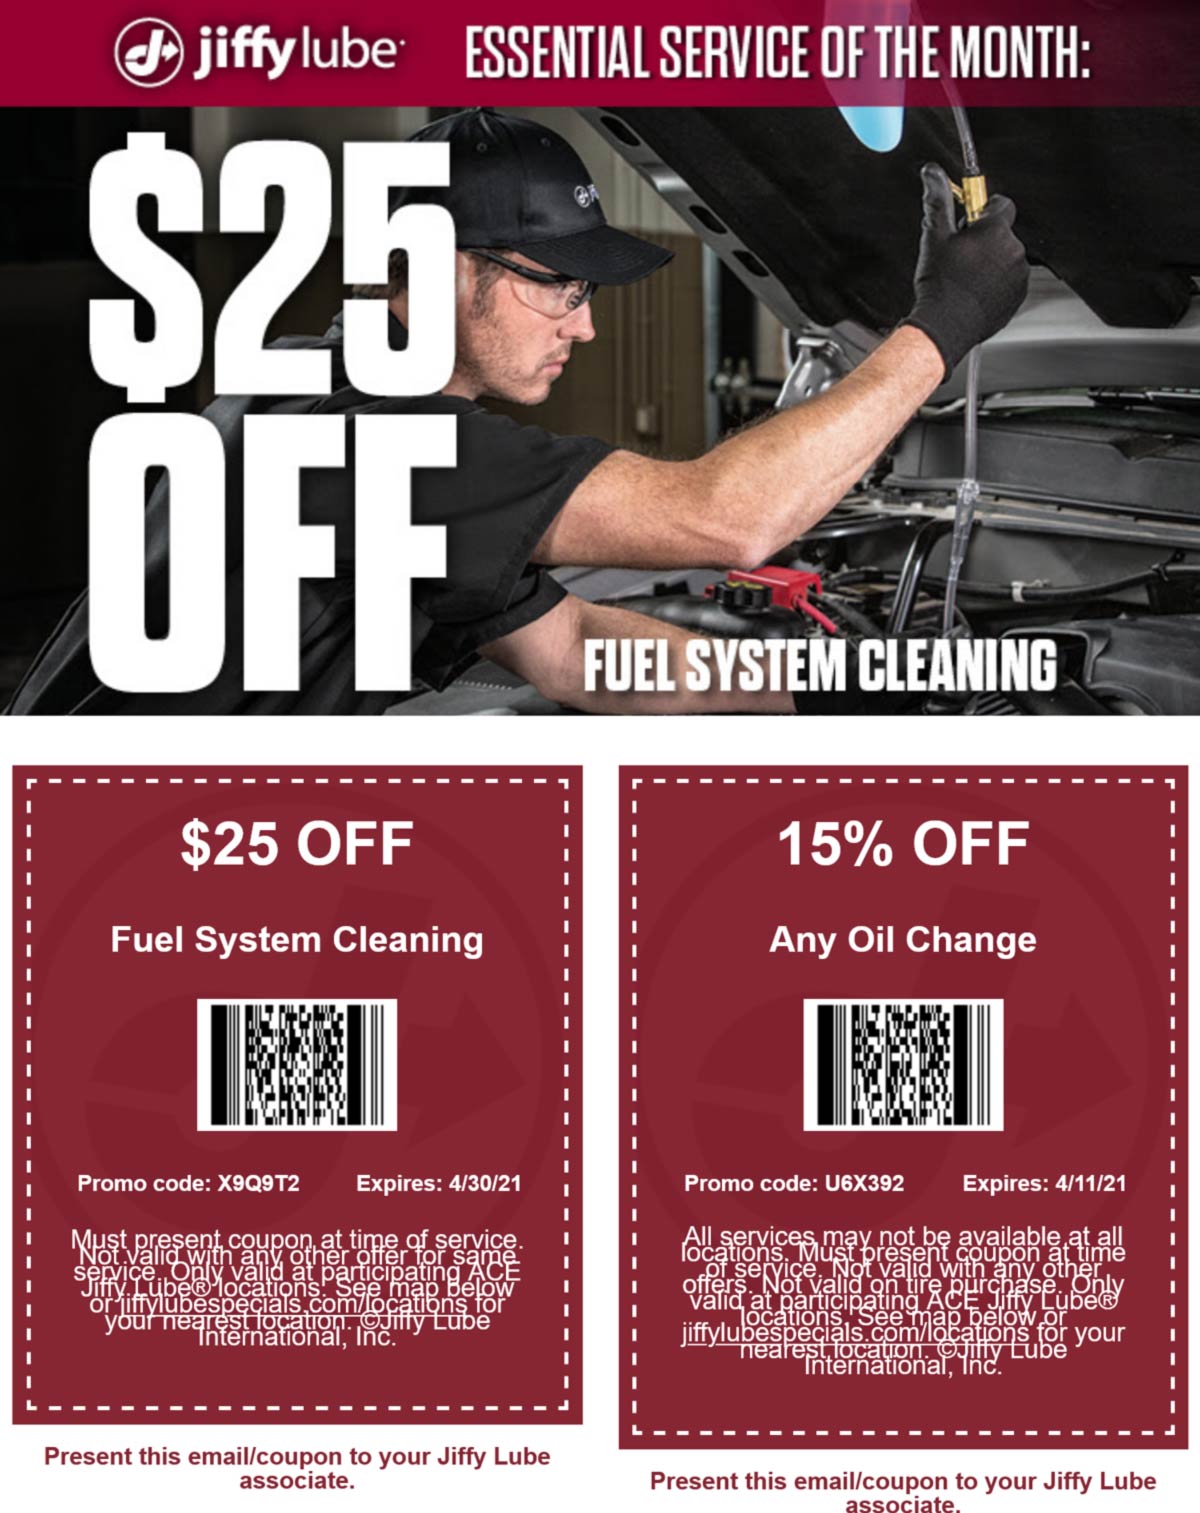 15% off any oil change $25 off fuel system cleaning at Jiffy Lube #